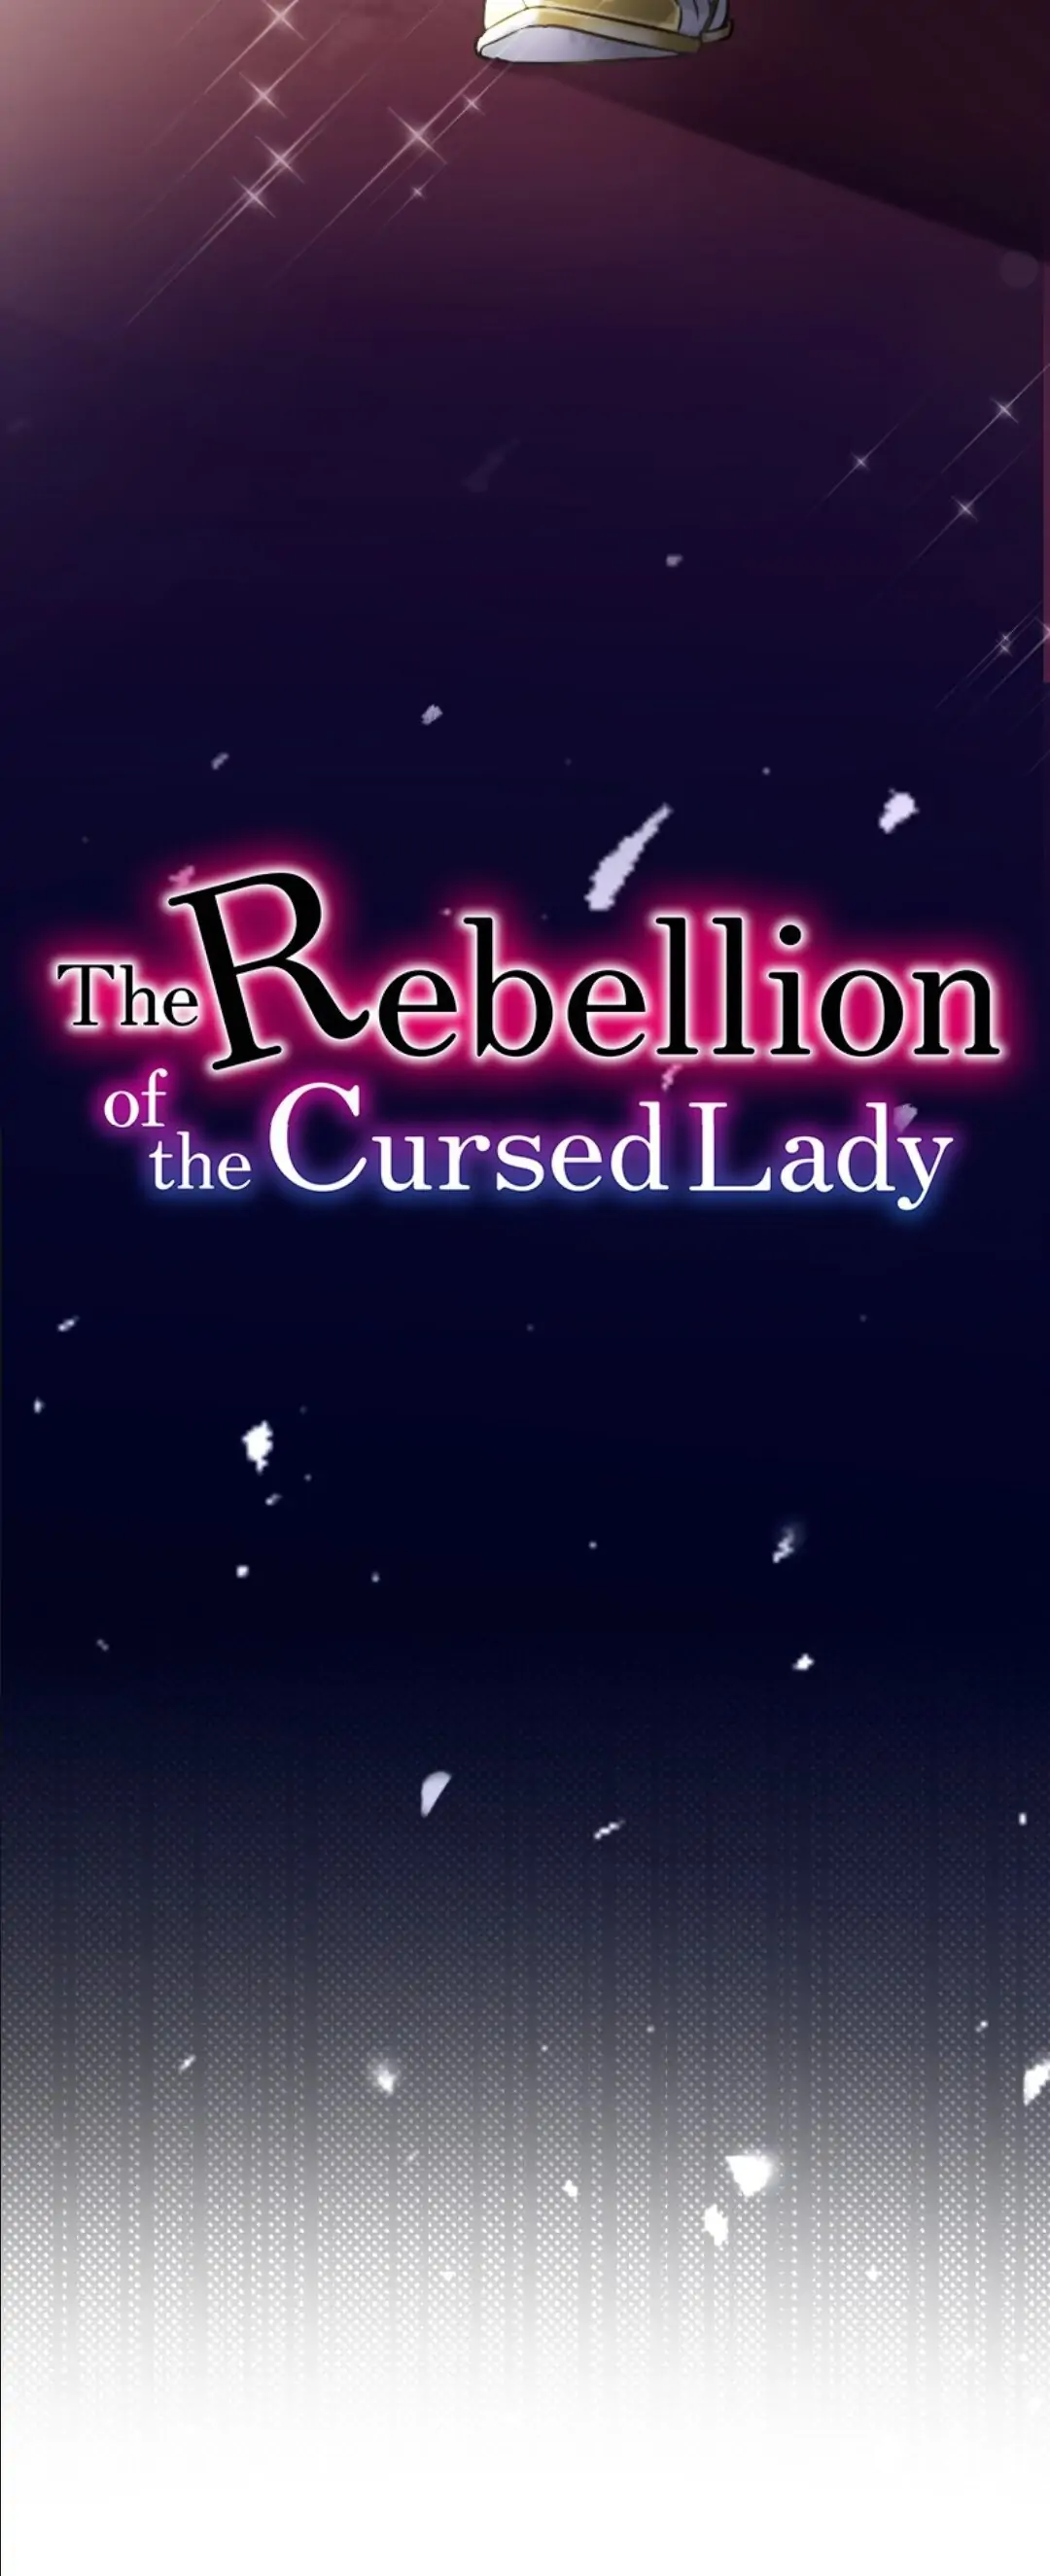 The Rebellion of the Cursed Lady chapter 1